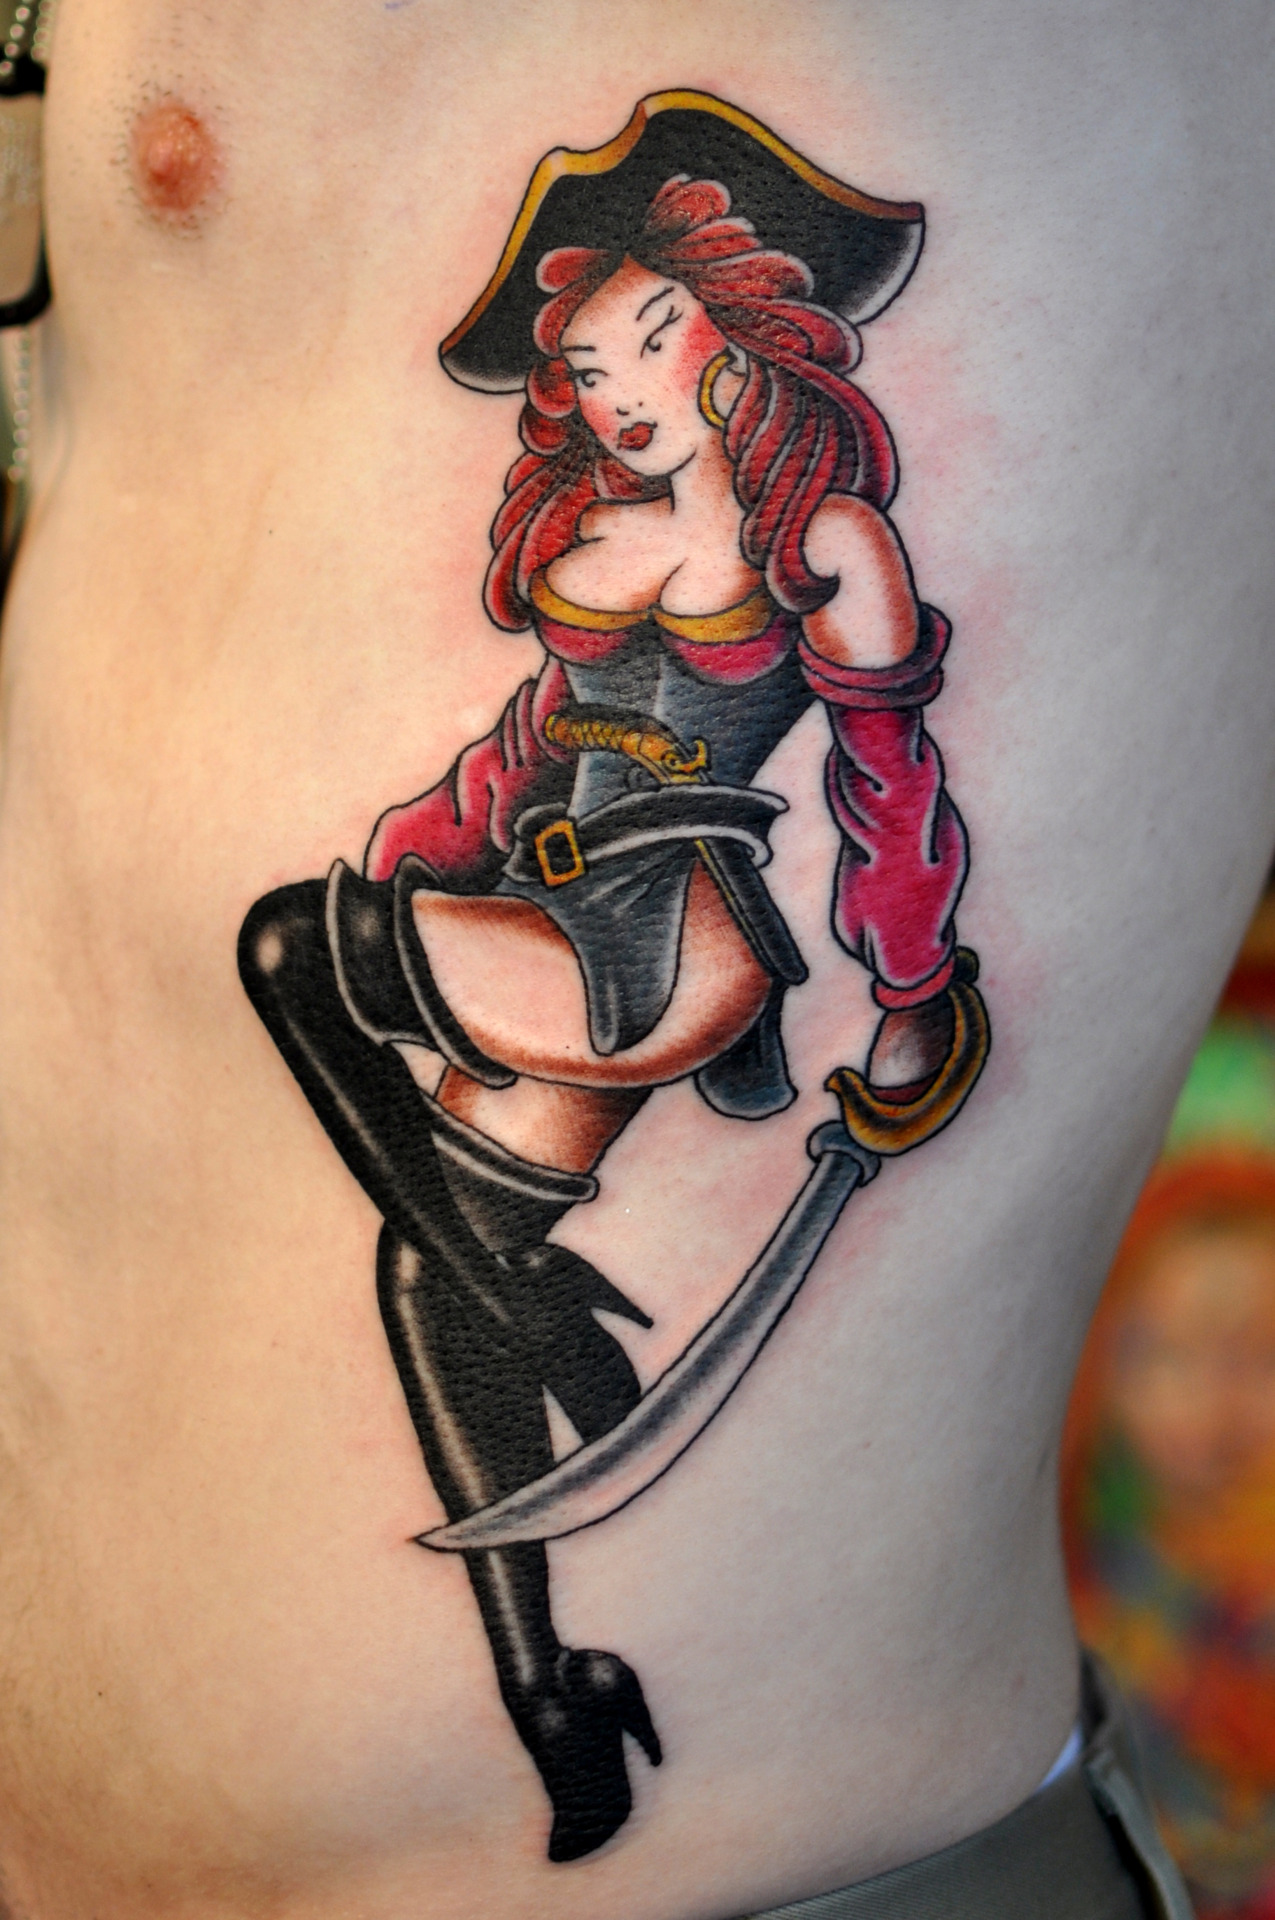 TheBestPinUpTattoos on Twitter Red Hair Pirate Pin Up Girl Tattoo  Andy  Engel  httptcoNxuNmzBONg httptcoUbJoeYKGDM  Twitter